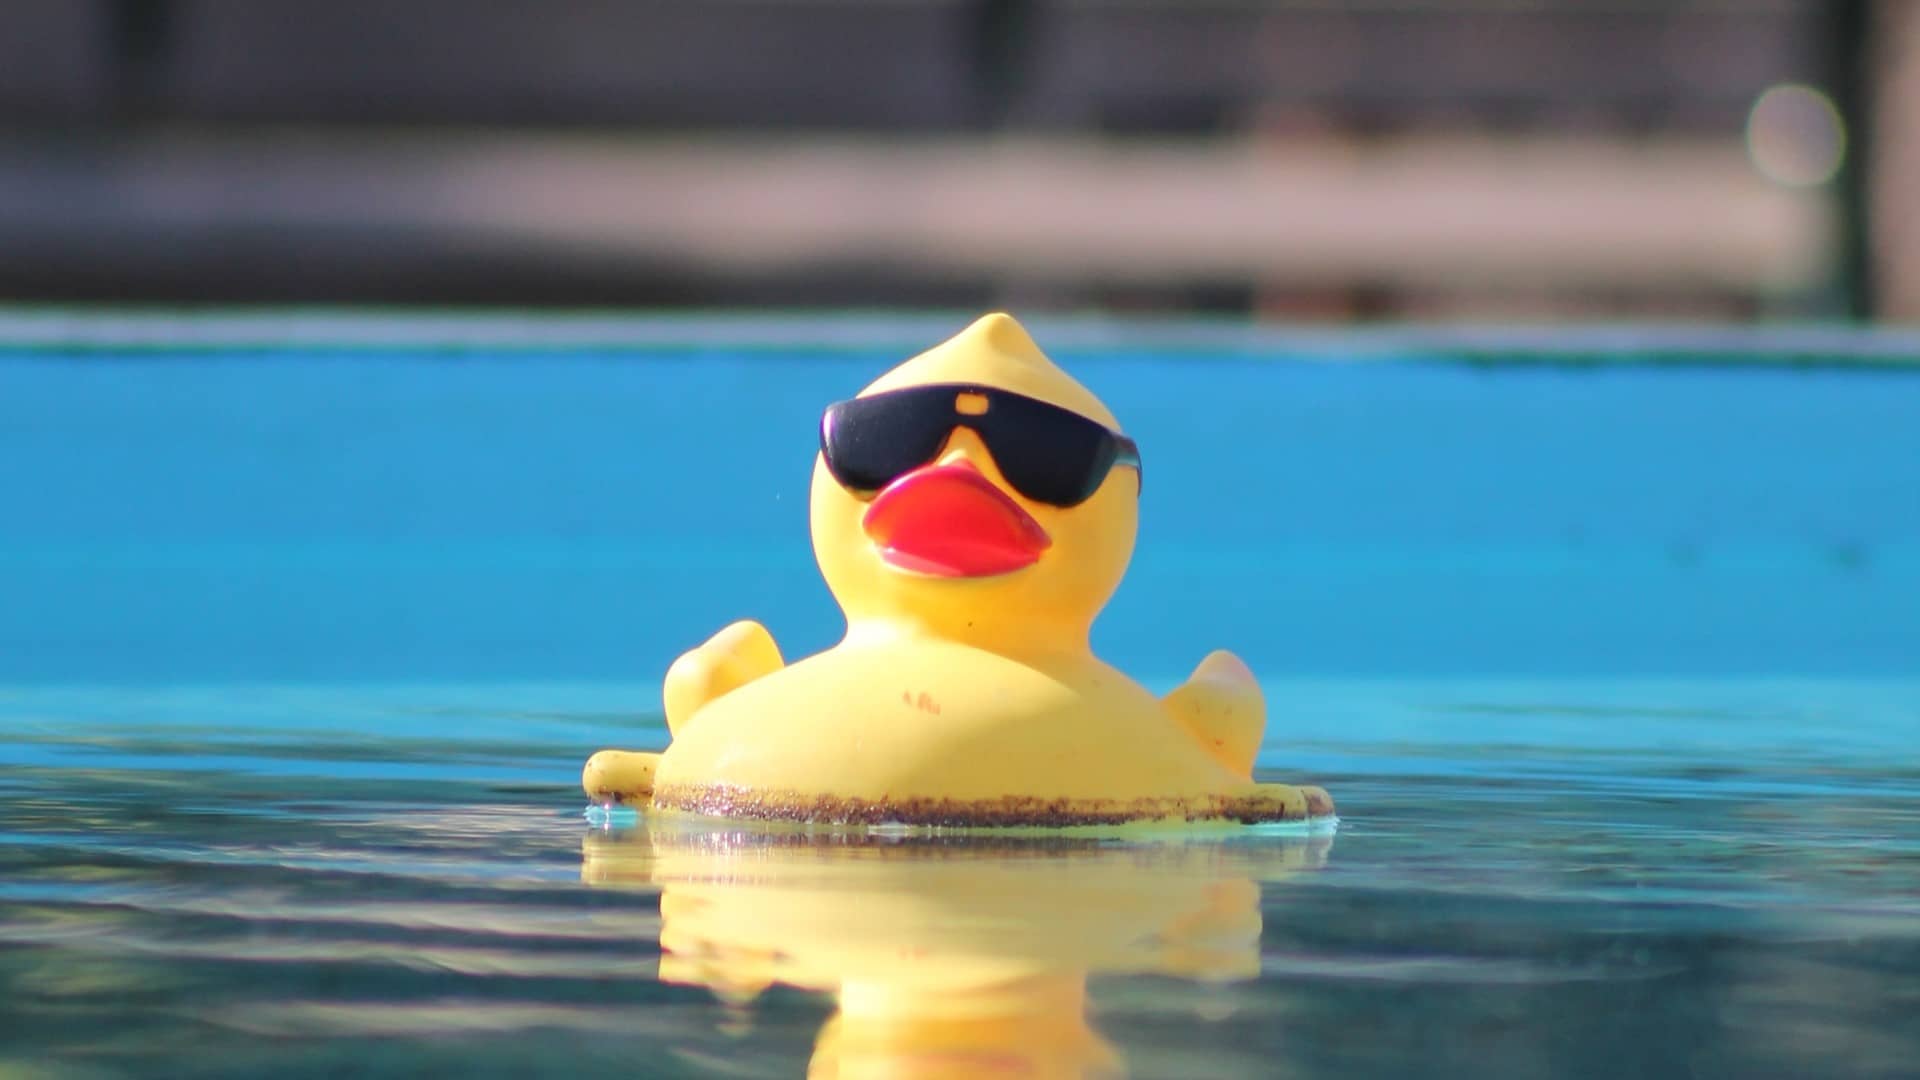 Image: A rubber ducky wearing sunglasses floating in a pool; just like the rubber ducky you could use to practice positive self-talk.